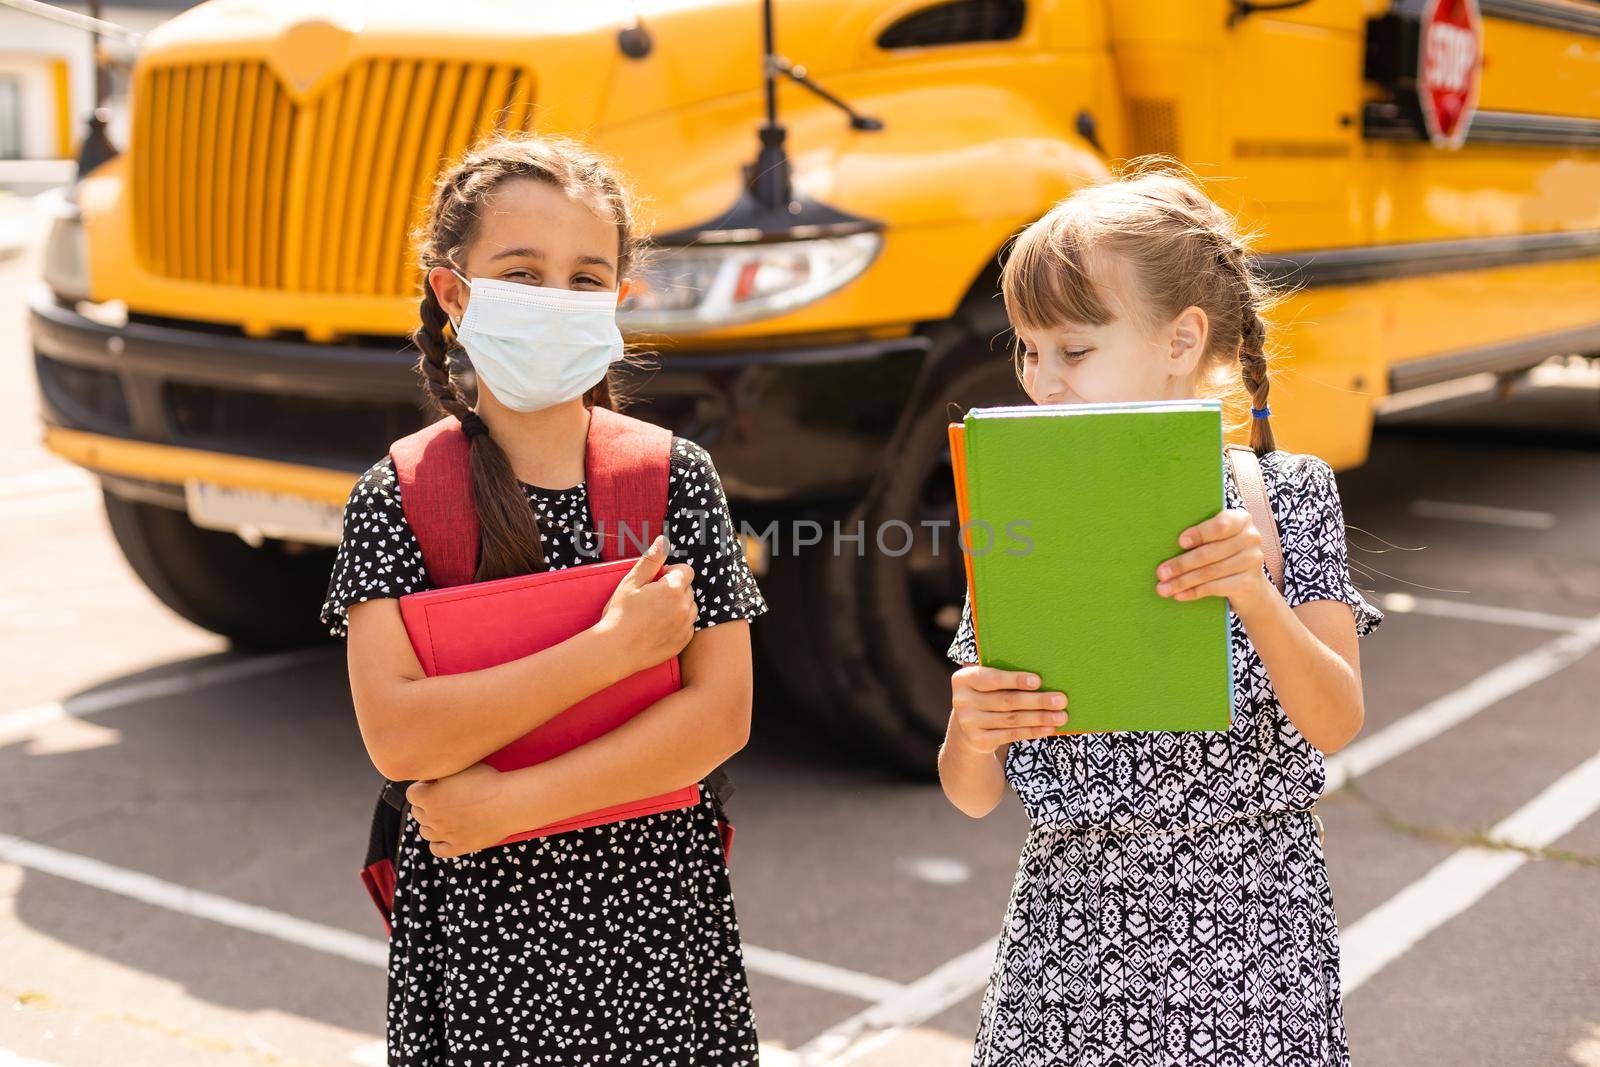 The schoolgirl puts on a mask to prevent colds and viruses. Medical concept. Back to school. Child going school after pandemic over. by Andelov13